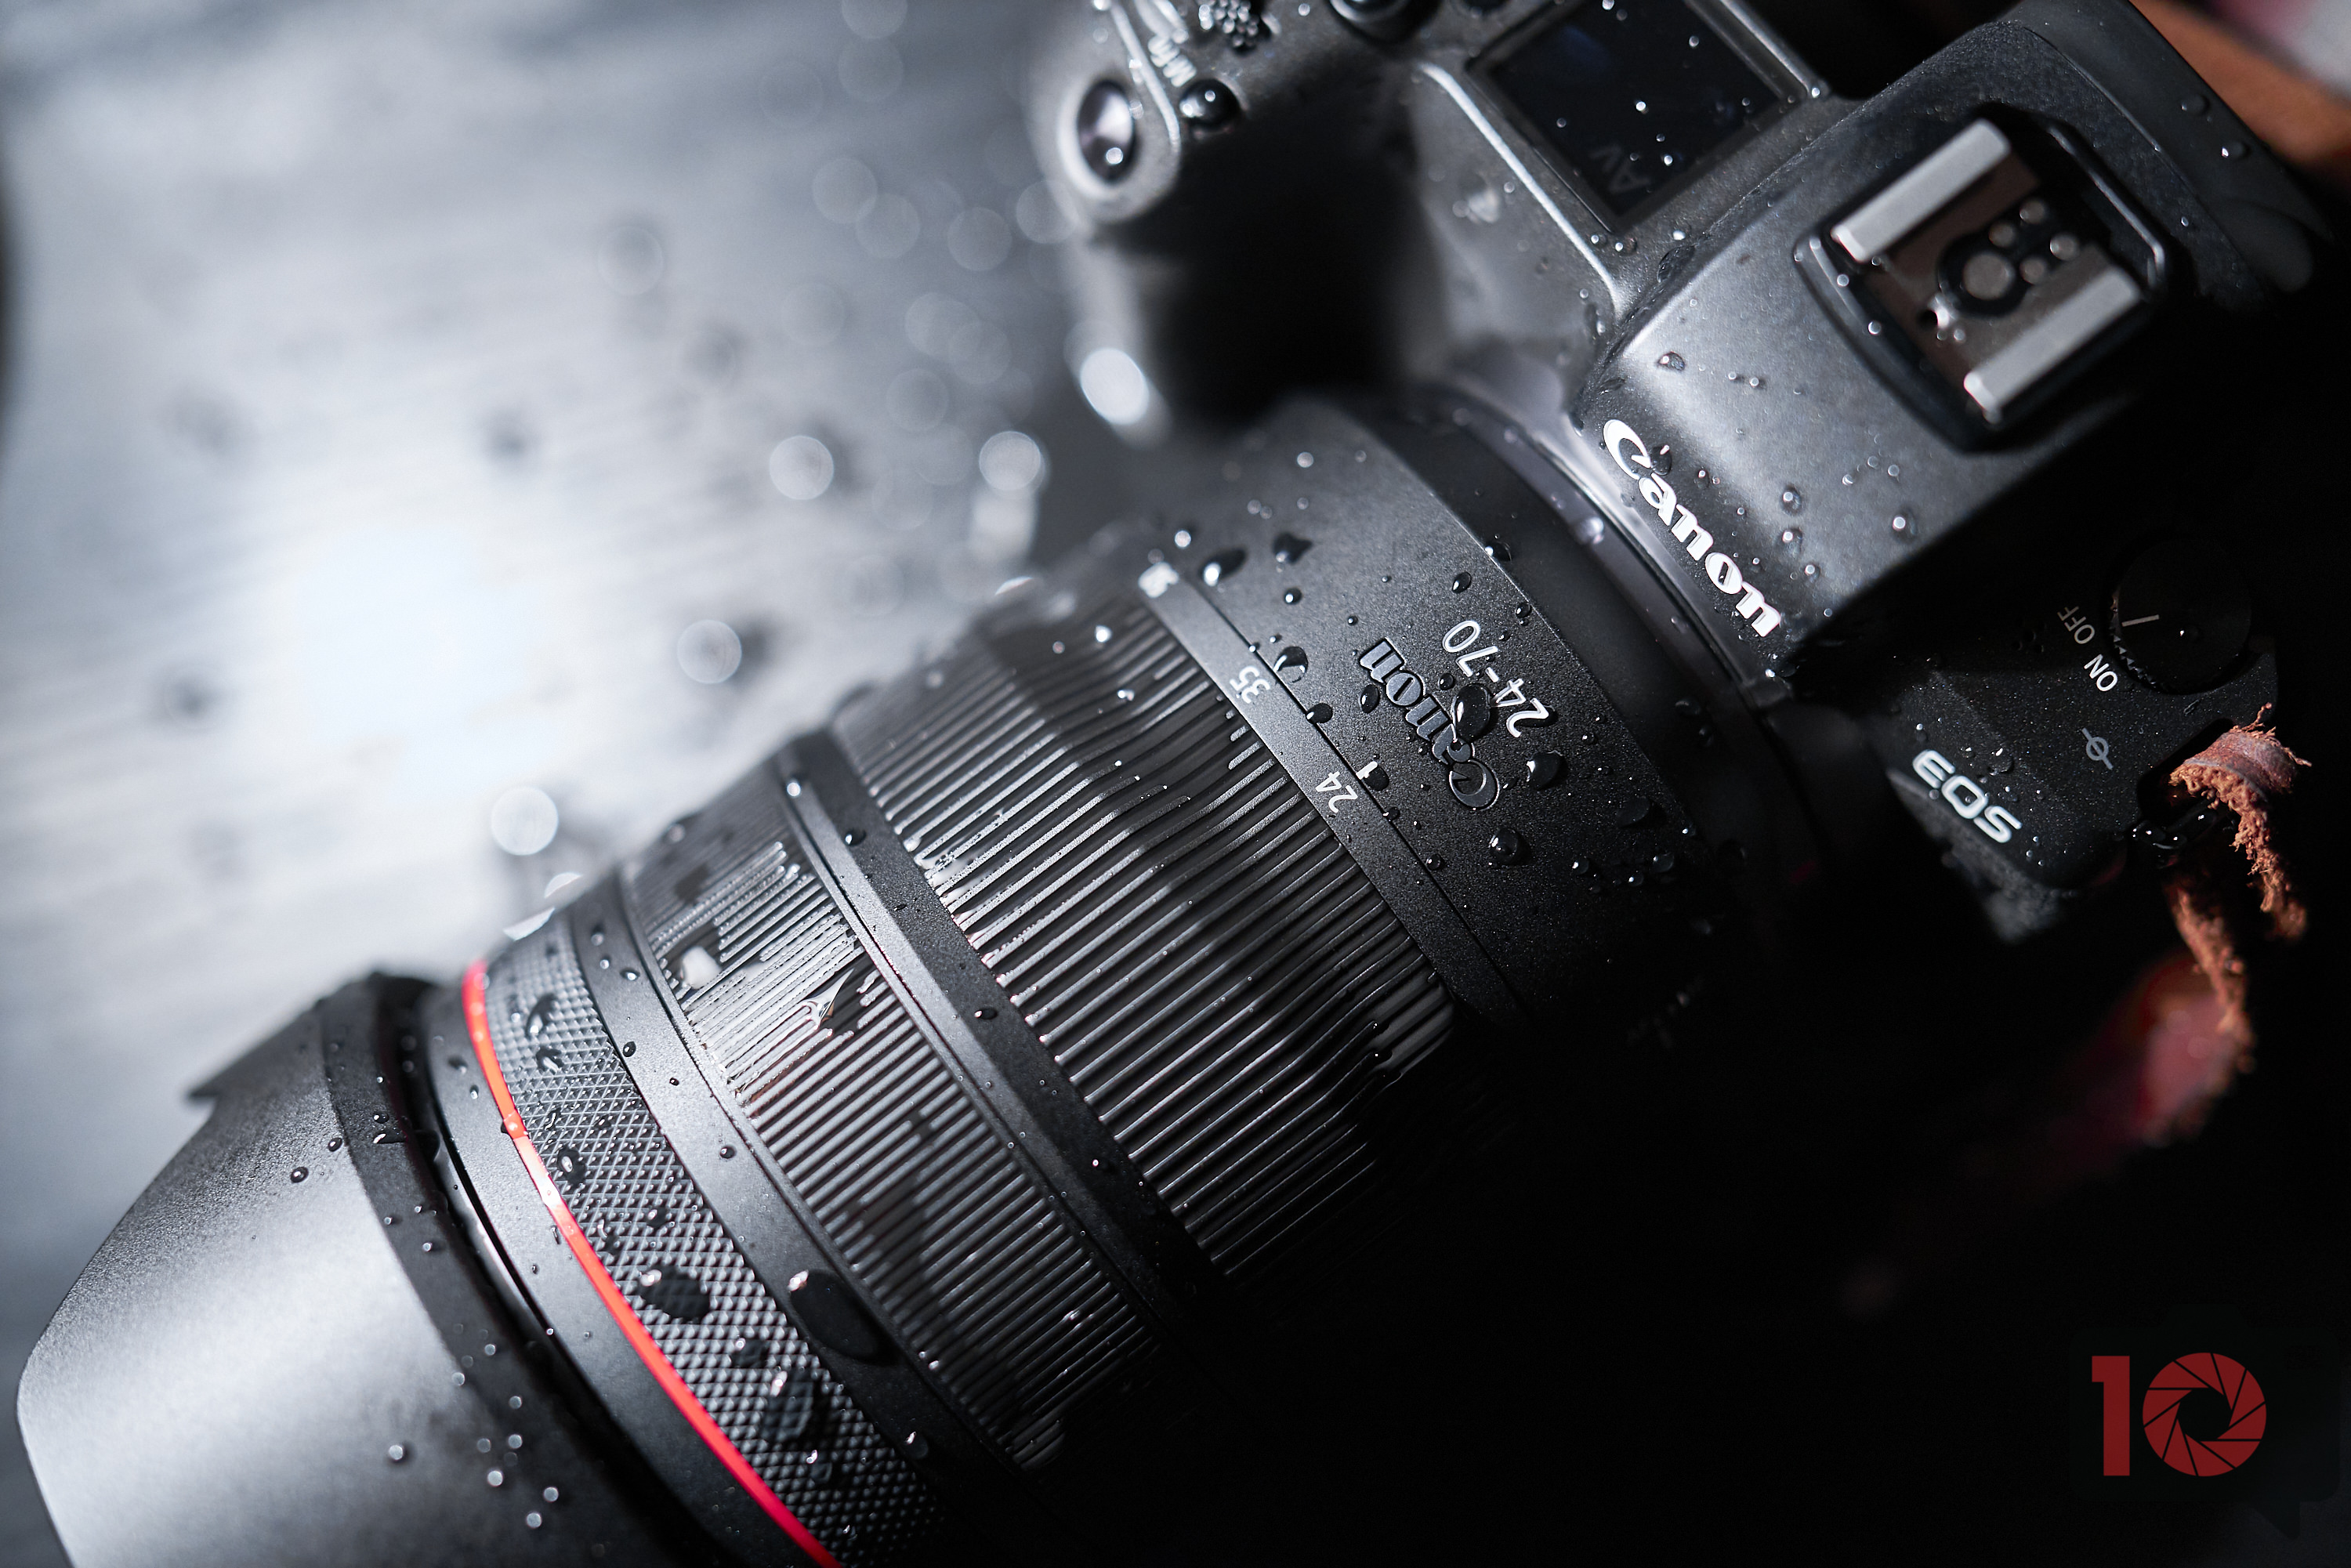 Review: Canon RF 24-70mm f2.8 L IS USM (This Lens Will Grow on You)